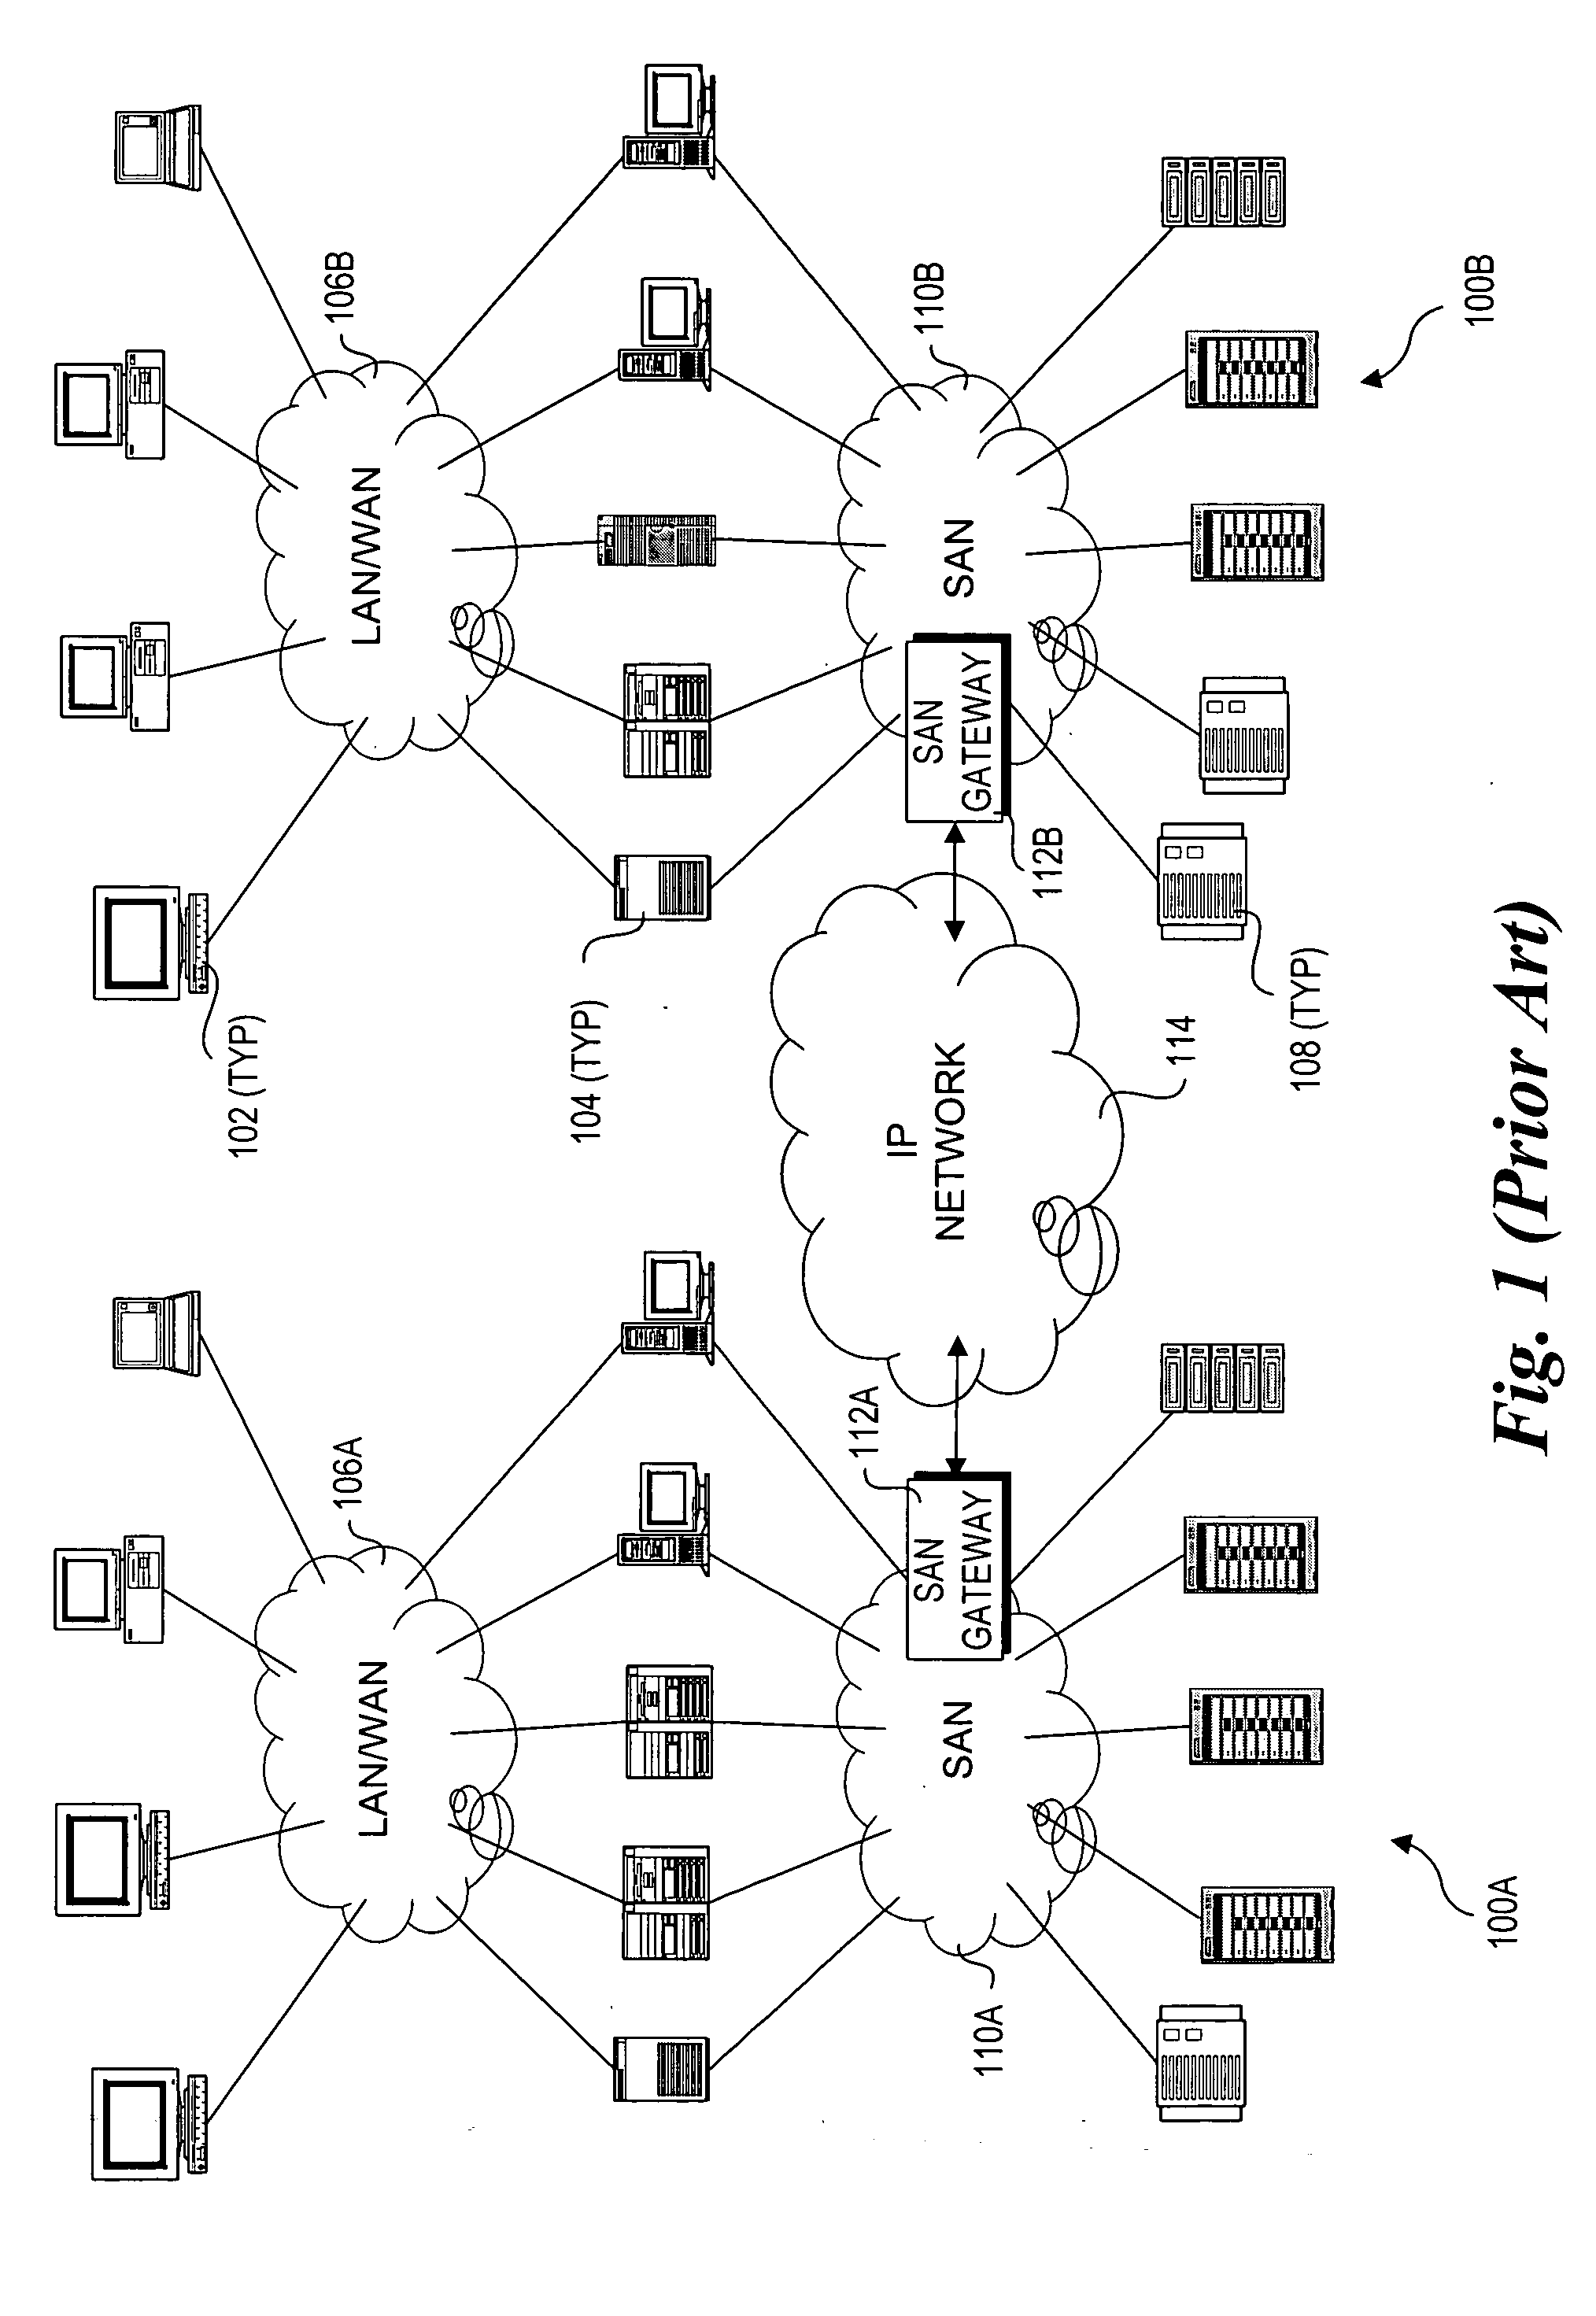 Method and architecture for optical networking between server and storage area networks